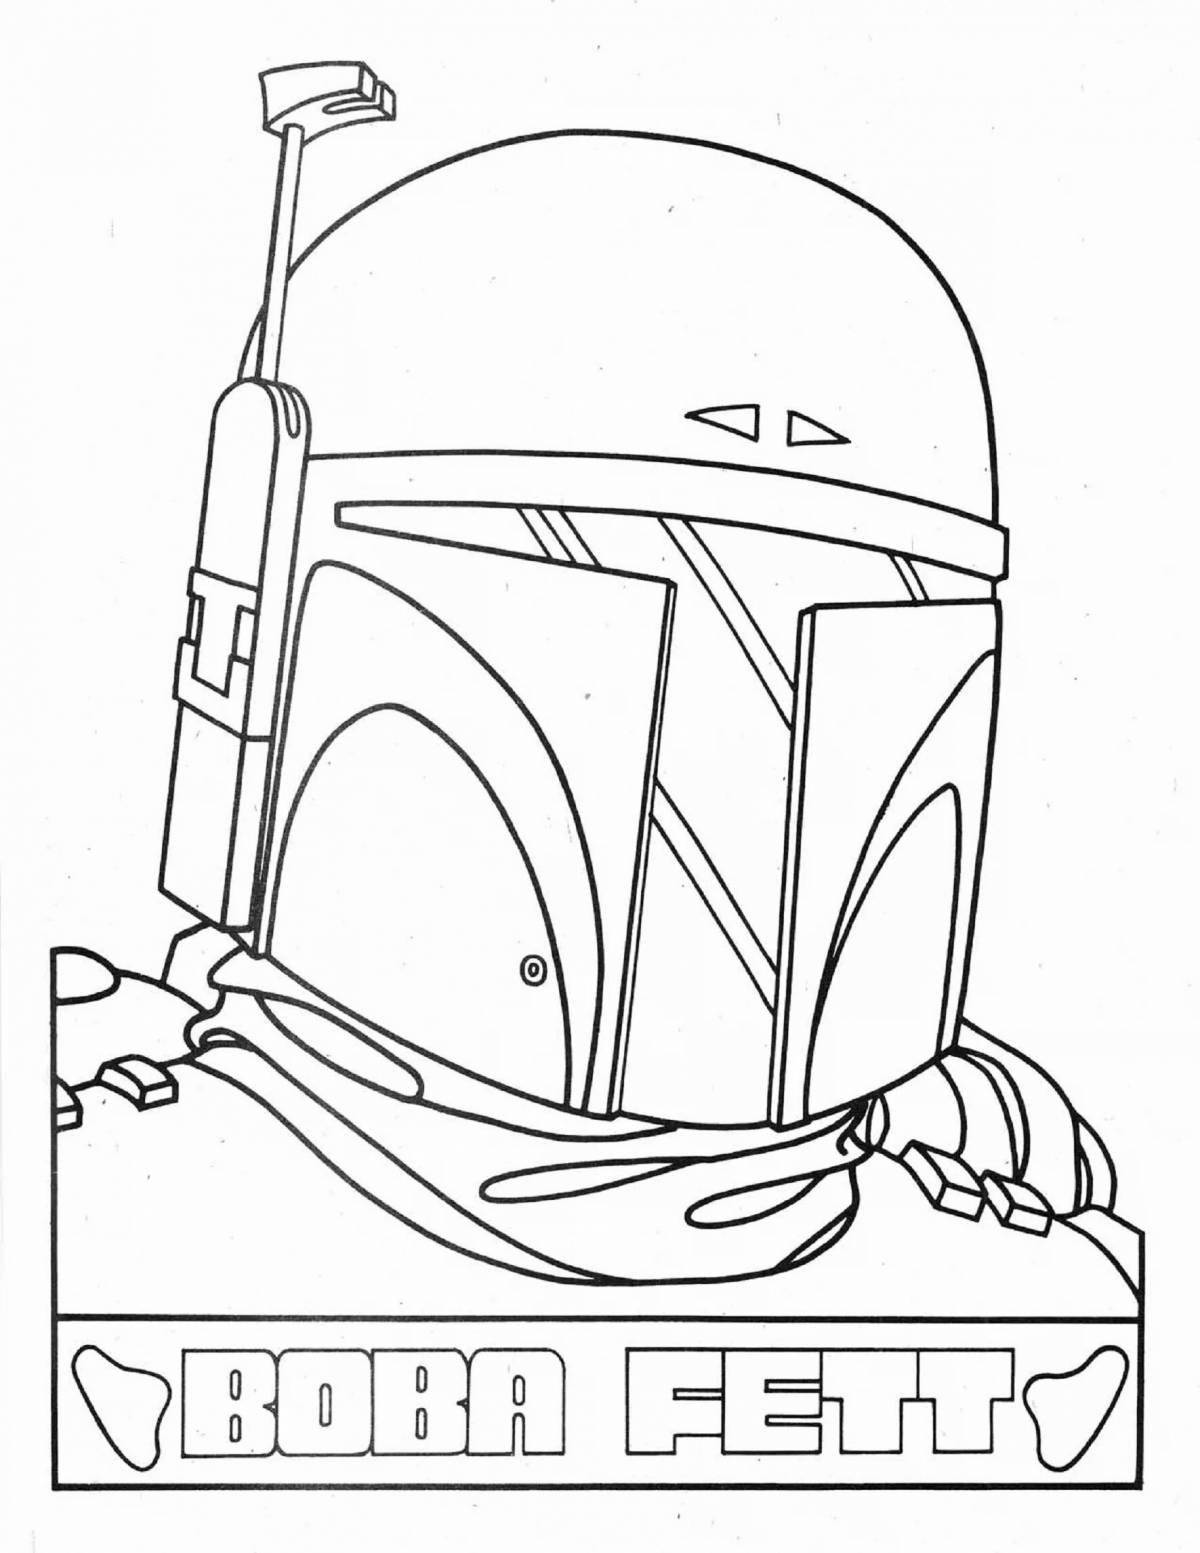 Coloring page charming boba fett